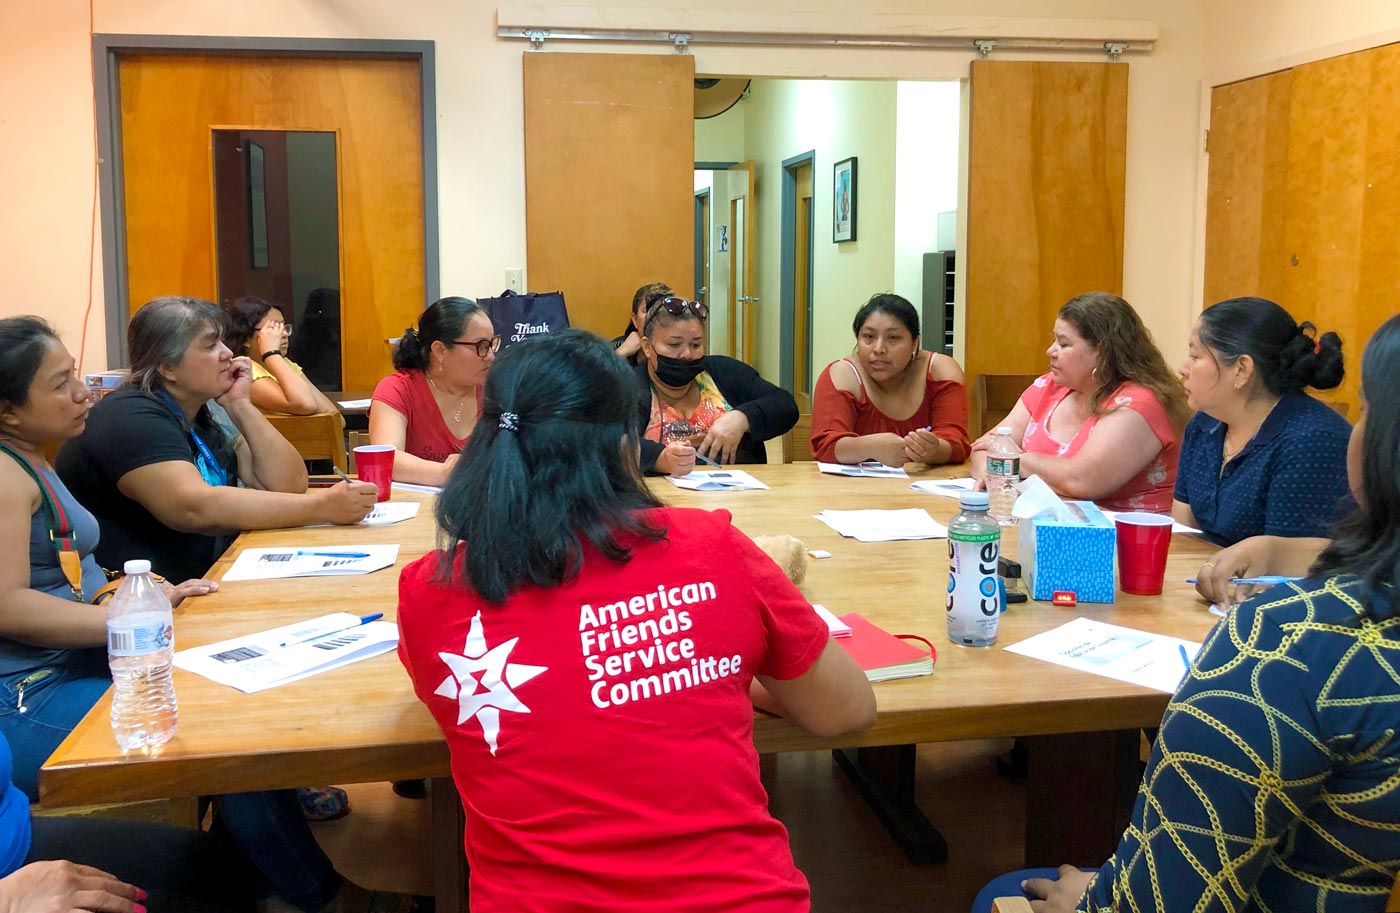 A women's group discusses immigration issues around a table